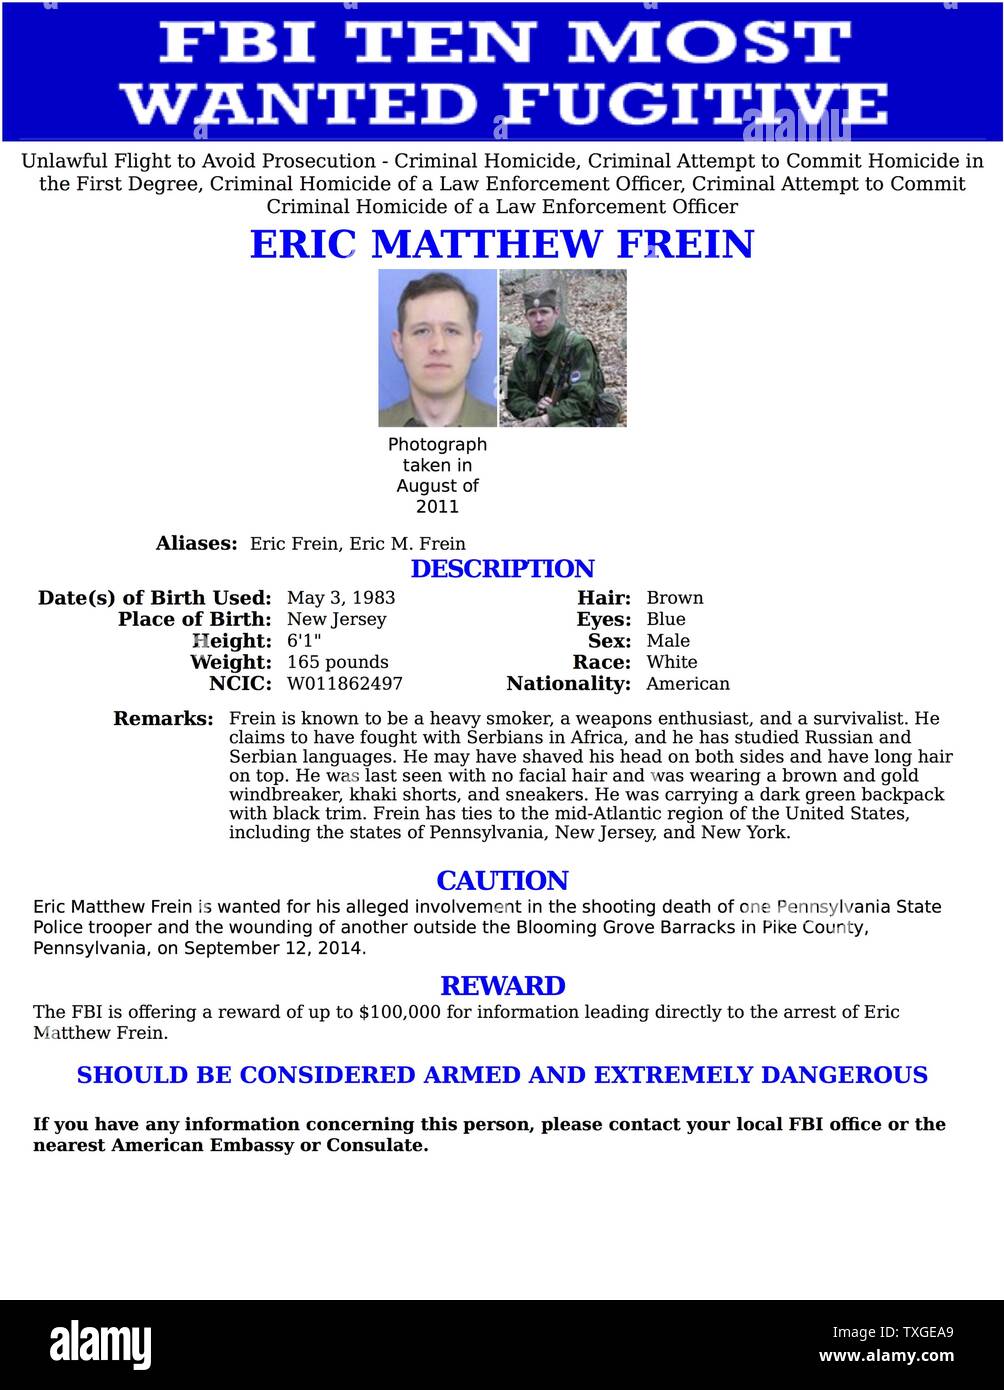 Top Ten Most Wanted notice issued by the FBI for Eric Matthew Frein (1983-) wanted for his alleged involvement in the shooting death of one of Pennsylvania State Police Trooper and wounding another. Dated 2014 Stock Photo